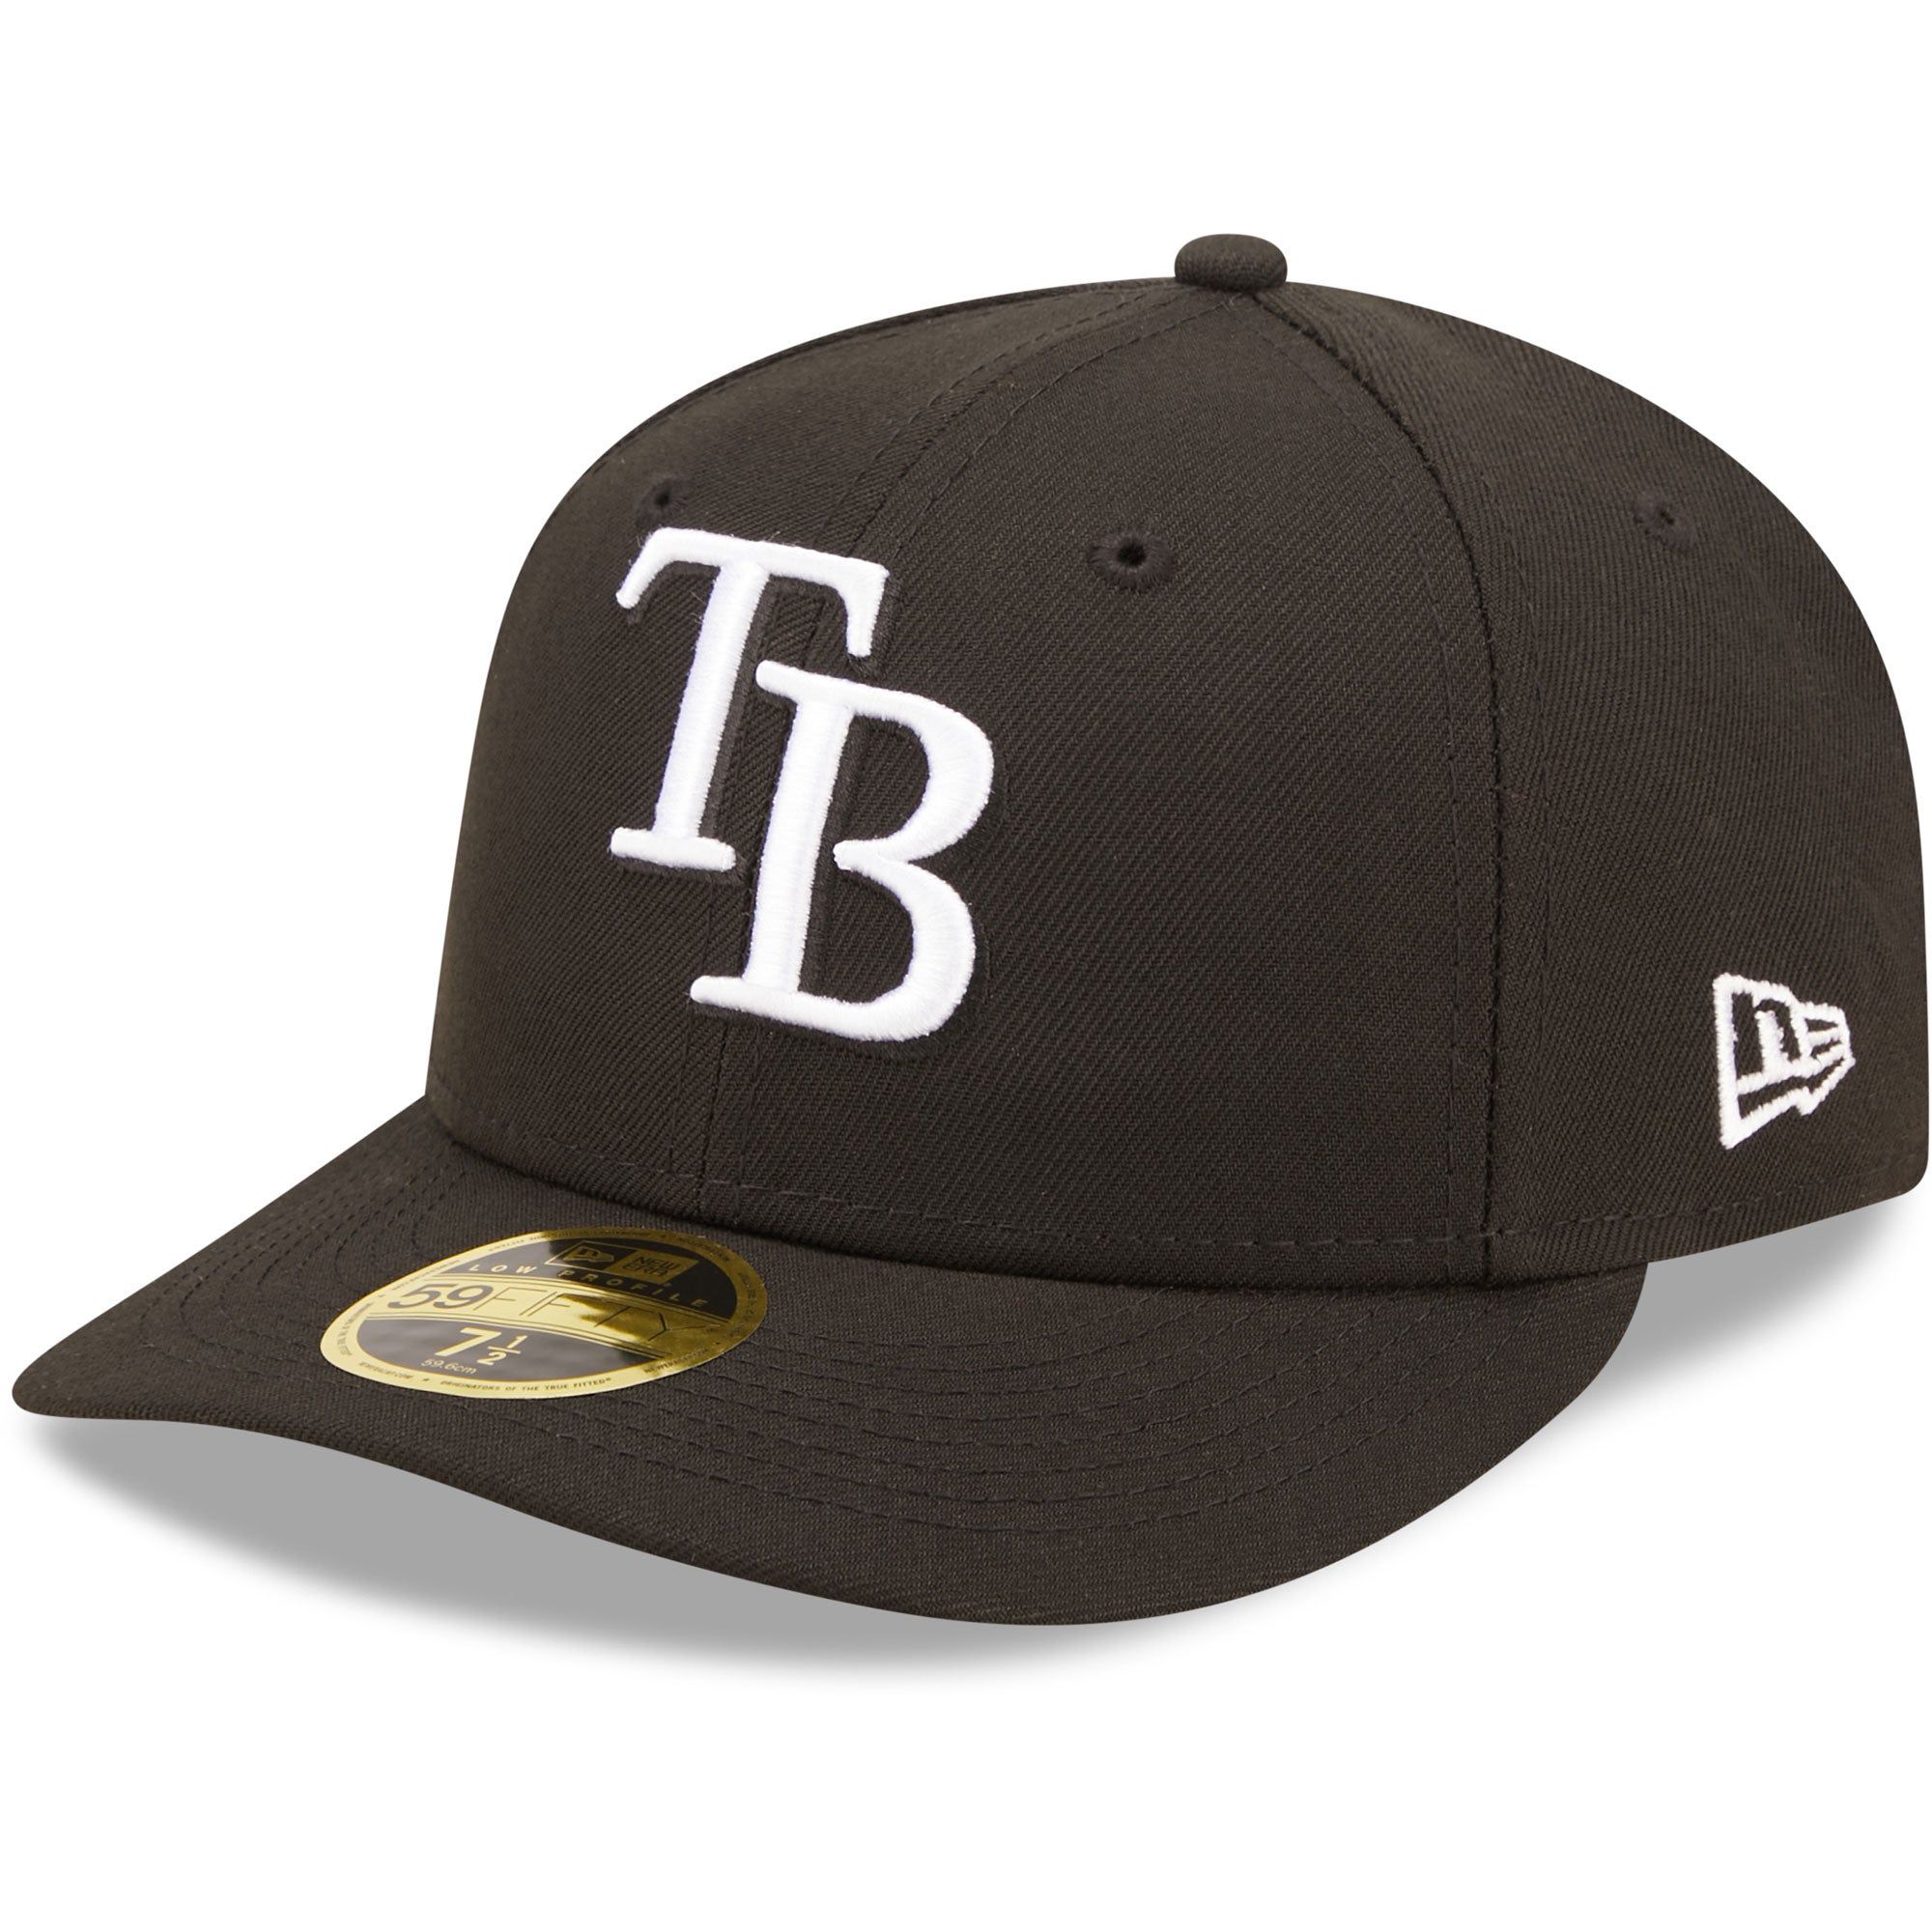 New Era Rays & Low Profile 59FIFTY Fitted Hat - Men's | Pueblo Mall